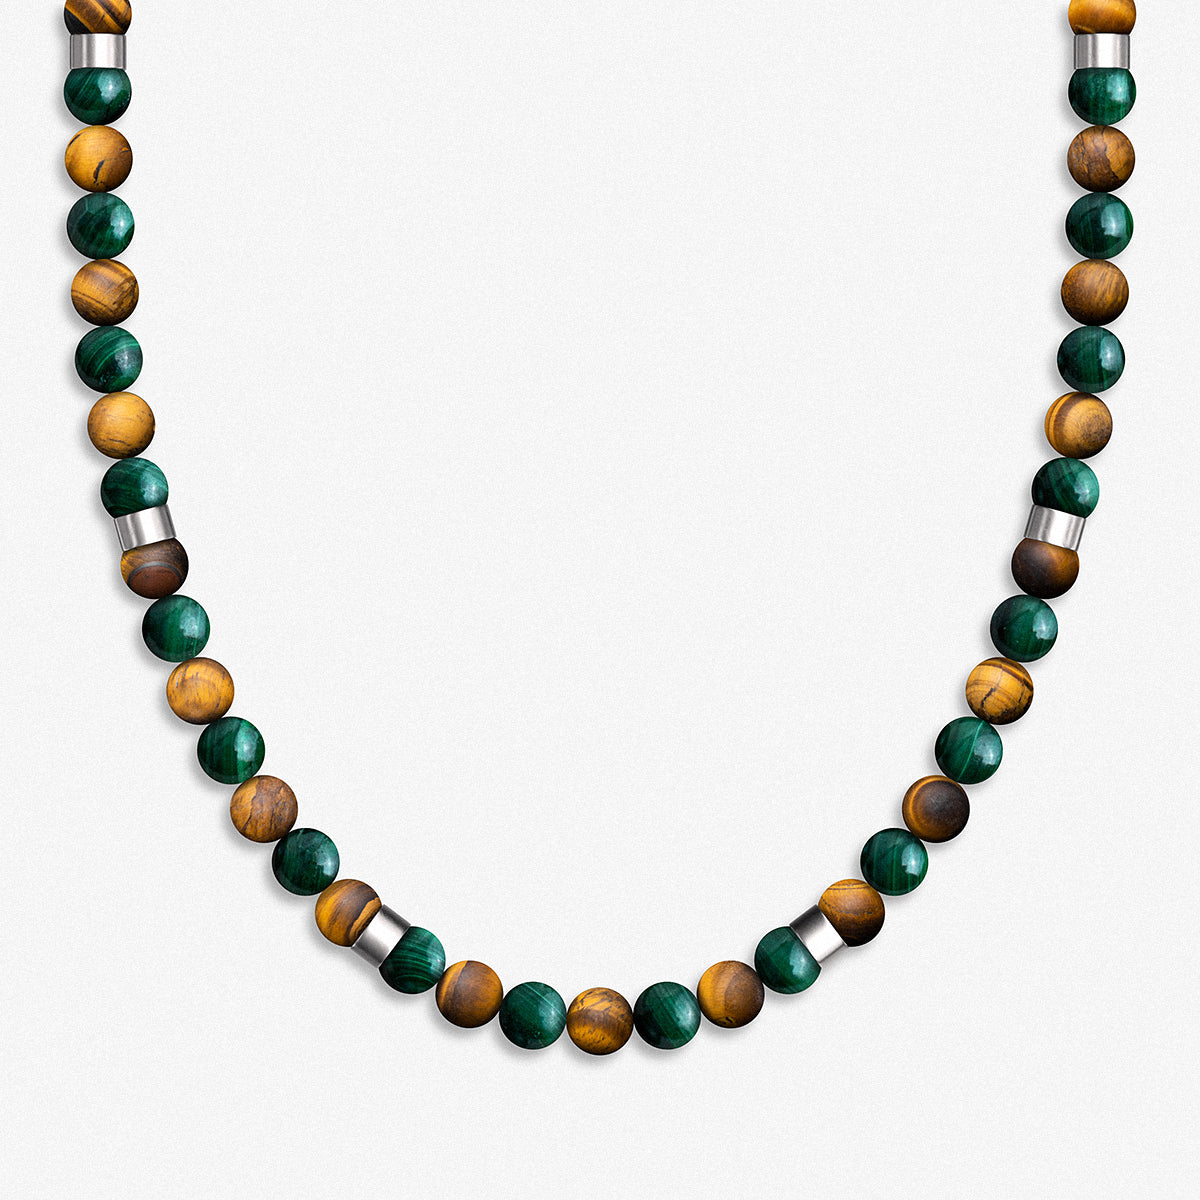 Beaded Necklace / 925 Sterling Silver, Tiger's Eye & Malachite